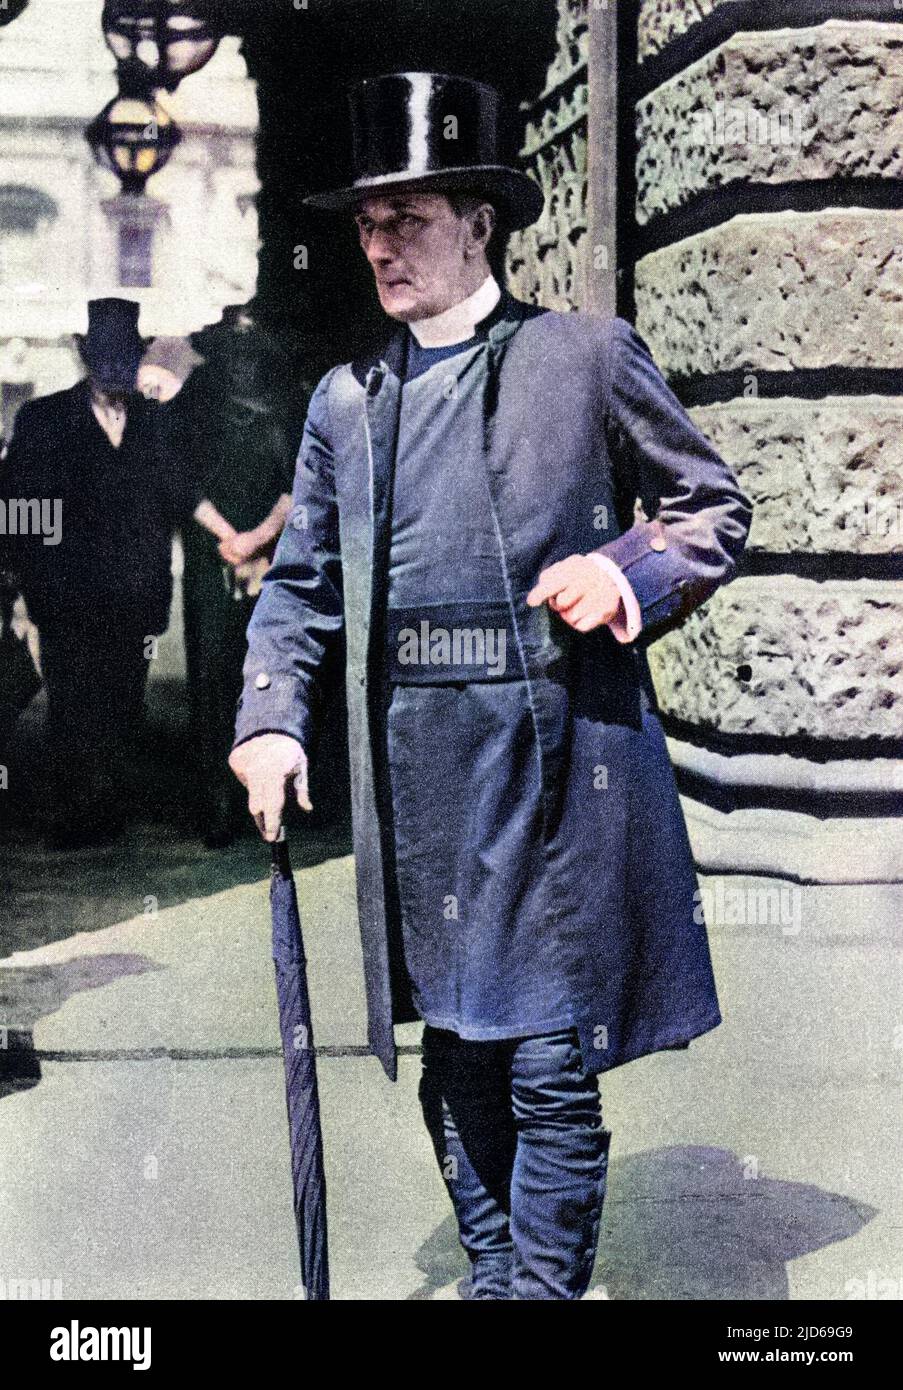 WILLIAM RALPH INGE (1860 - 1954), English churchman, professor of divinity, author, known as 'the gloomy Dean' (of St Pauls), wearing the weird garb of senior churchmen. Colourised version of : 10161601 Stock Photo